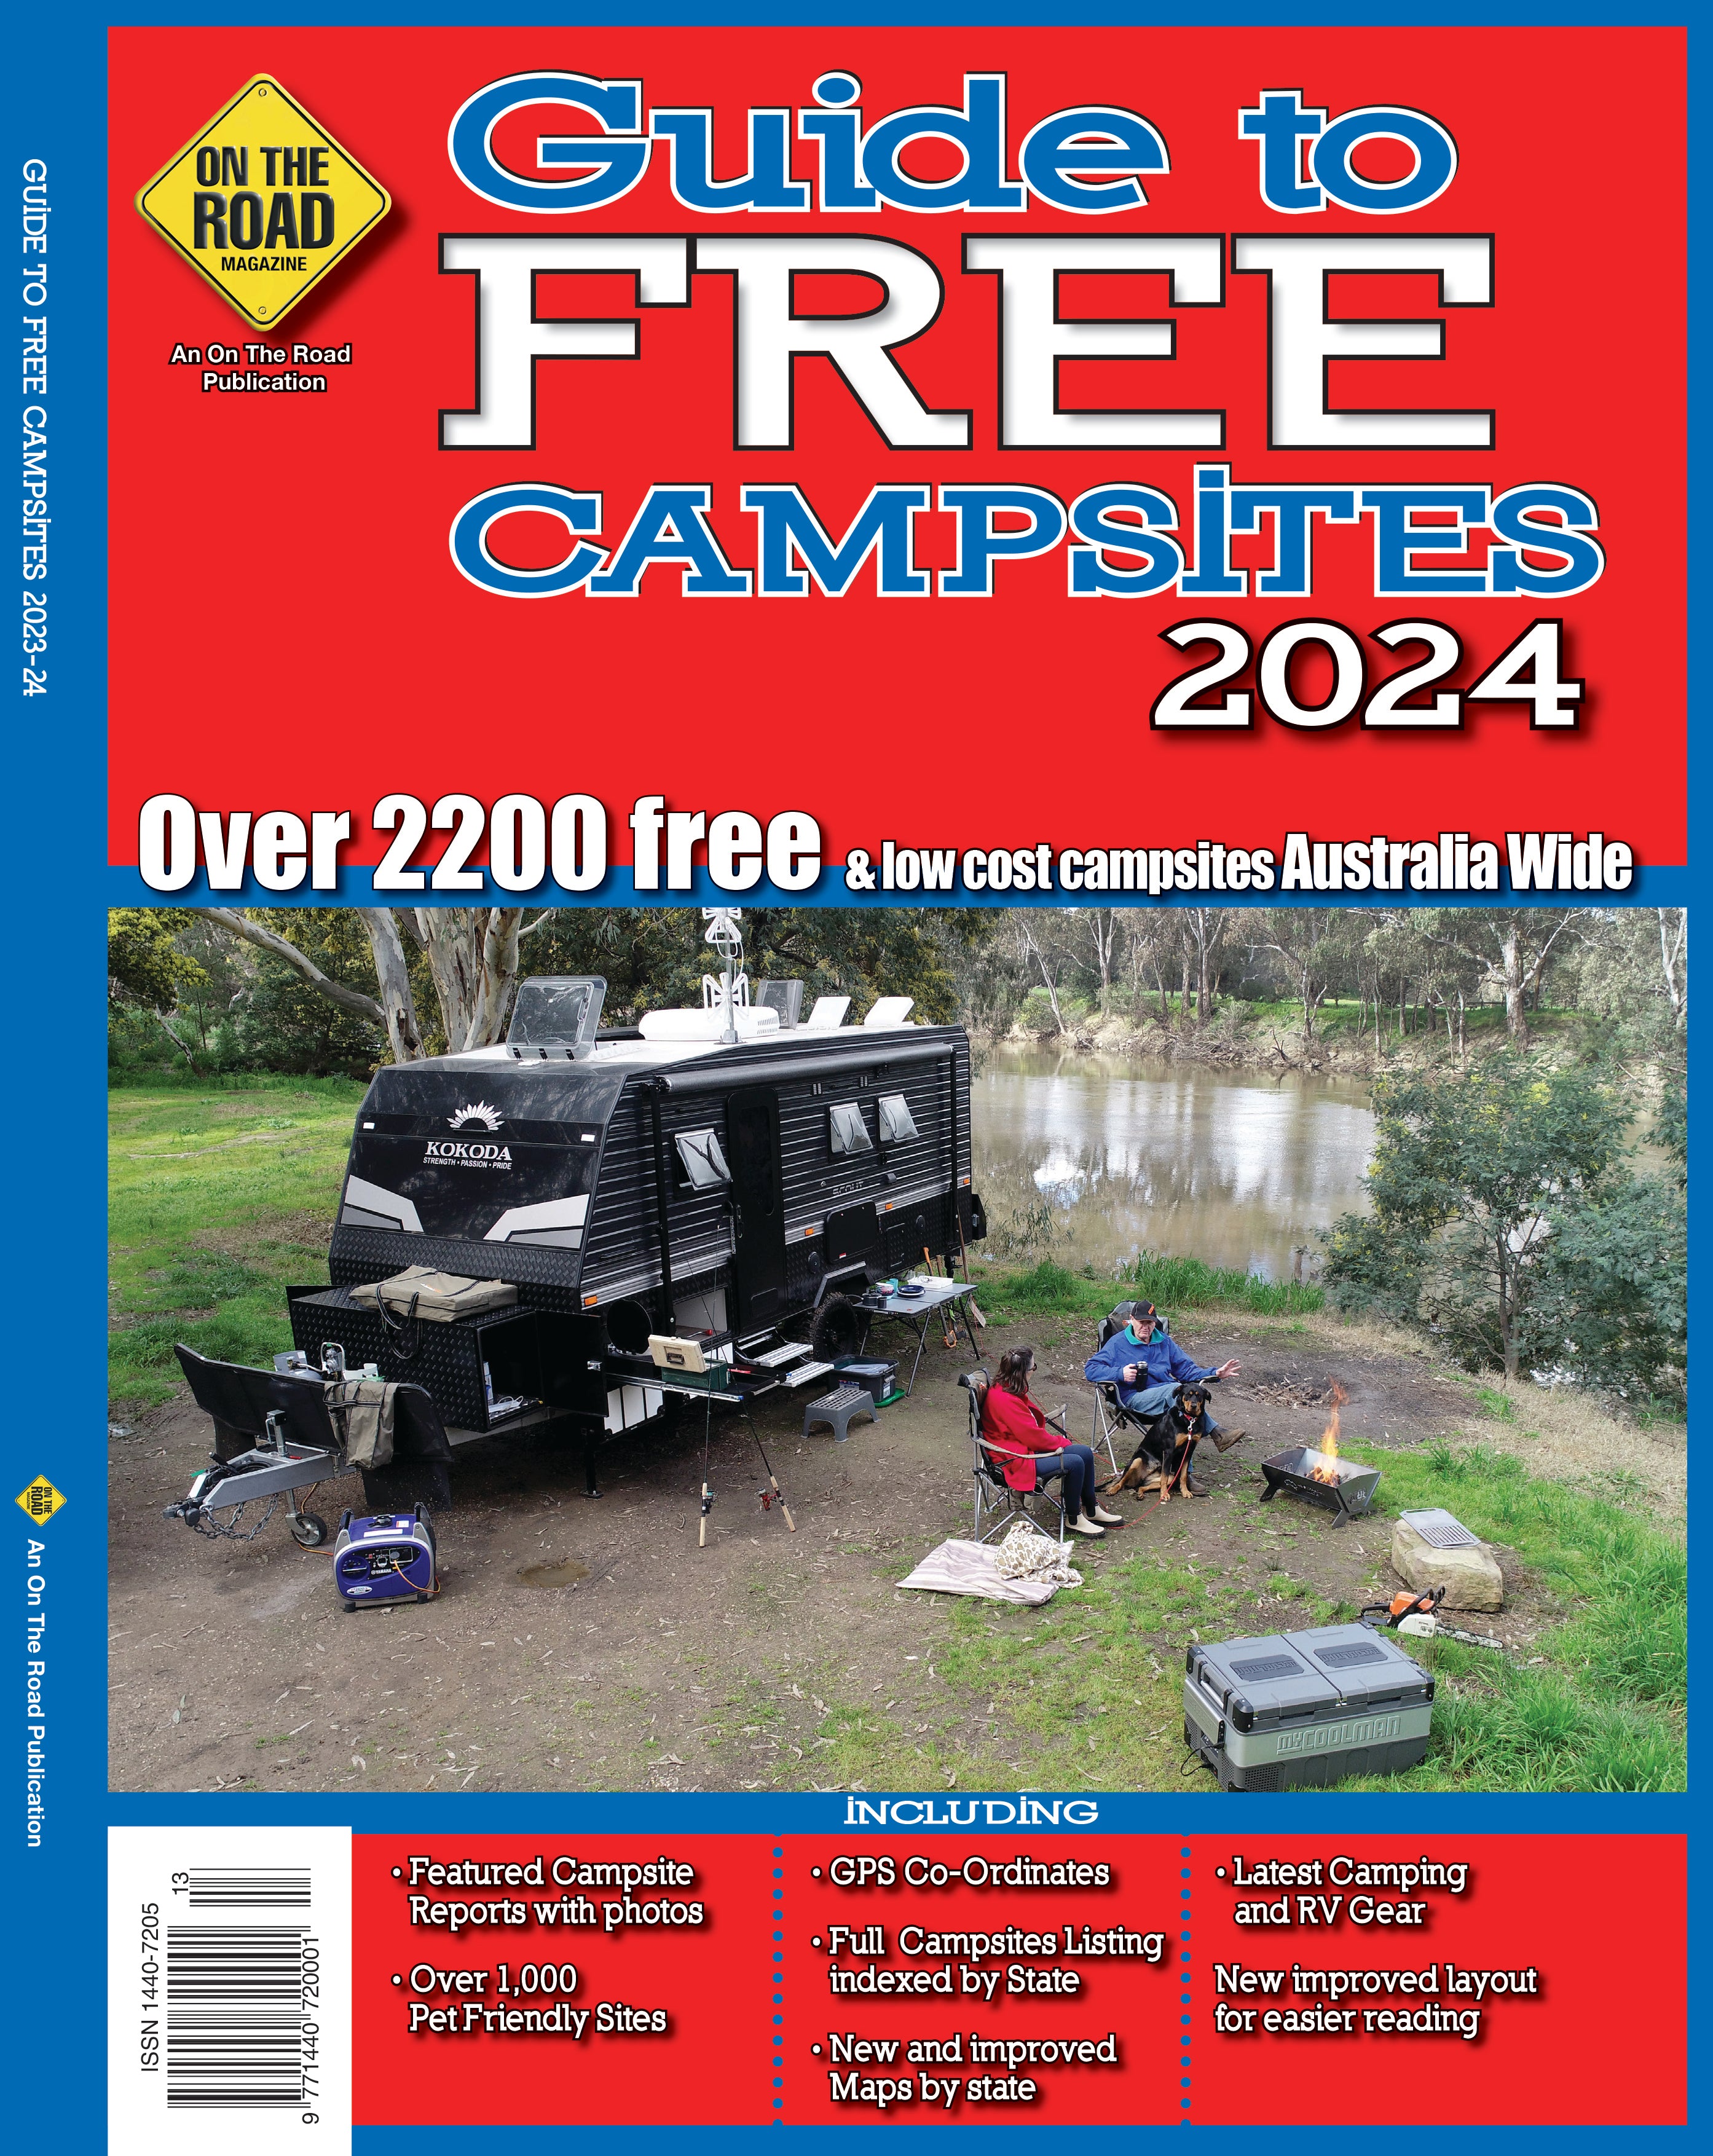 Guide to Free Campsites 2024